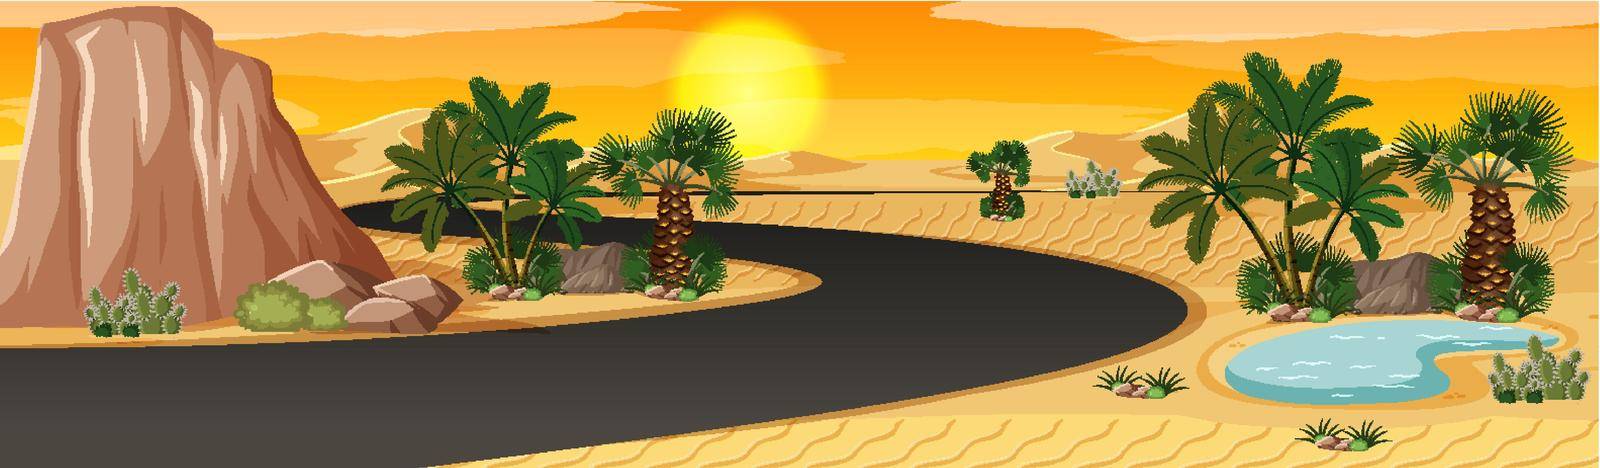 Desert oasis with palms nature landscape scene by iimages